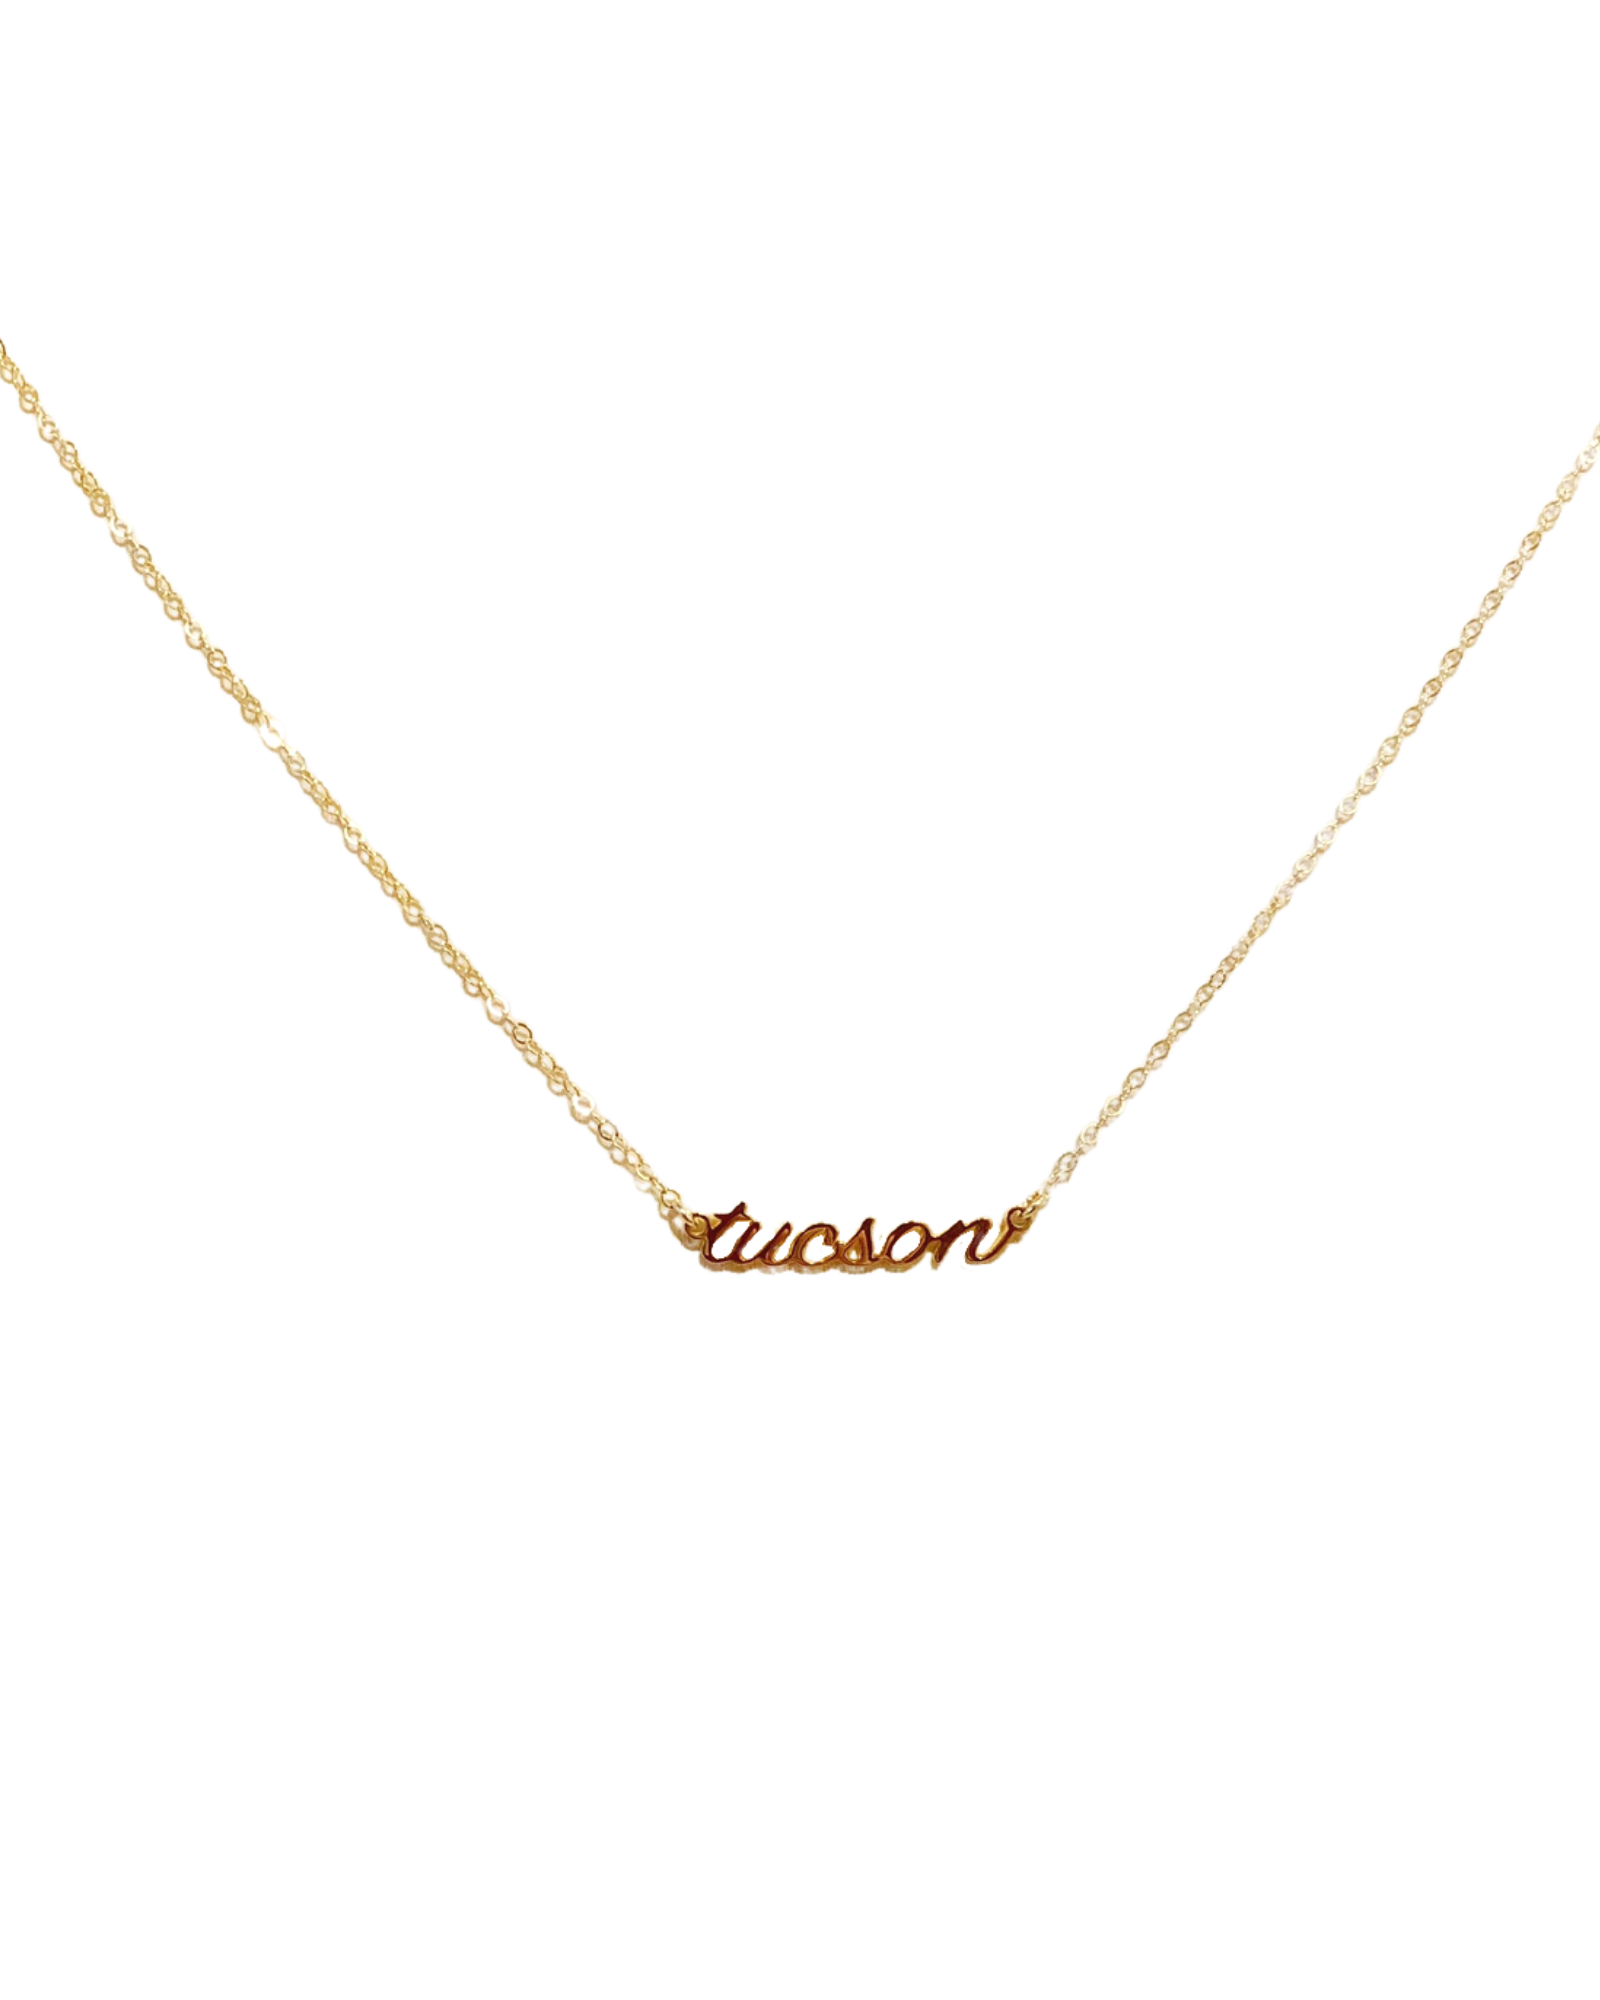 Gold necklace with the word Tucson in cursive font with a gold chain